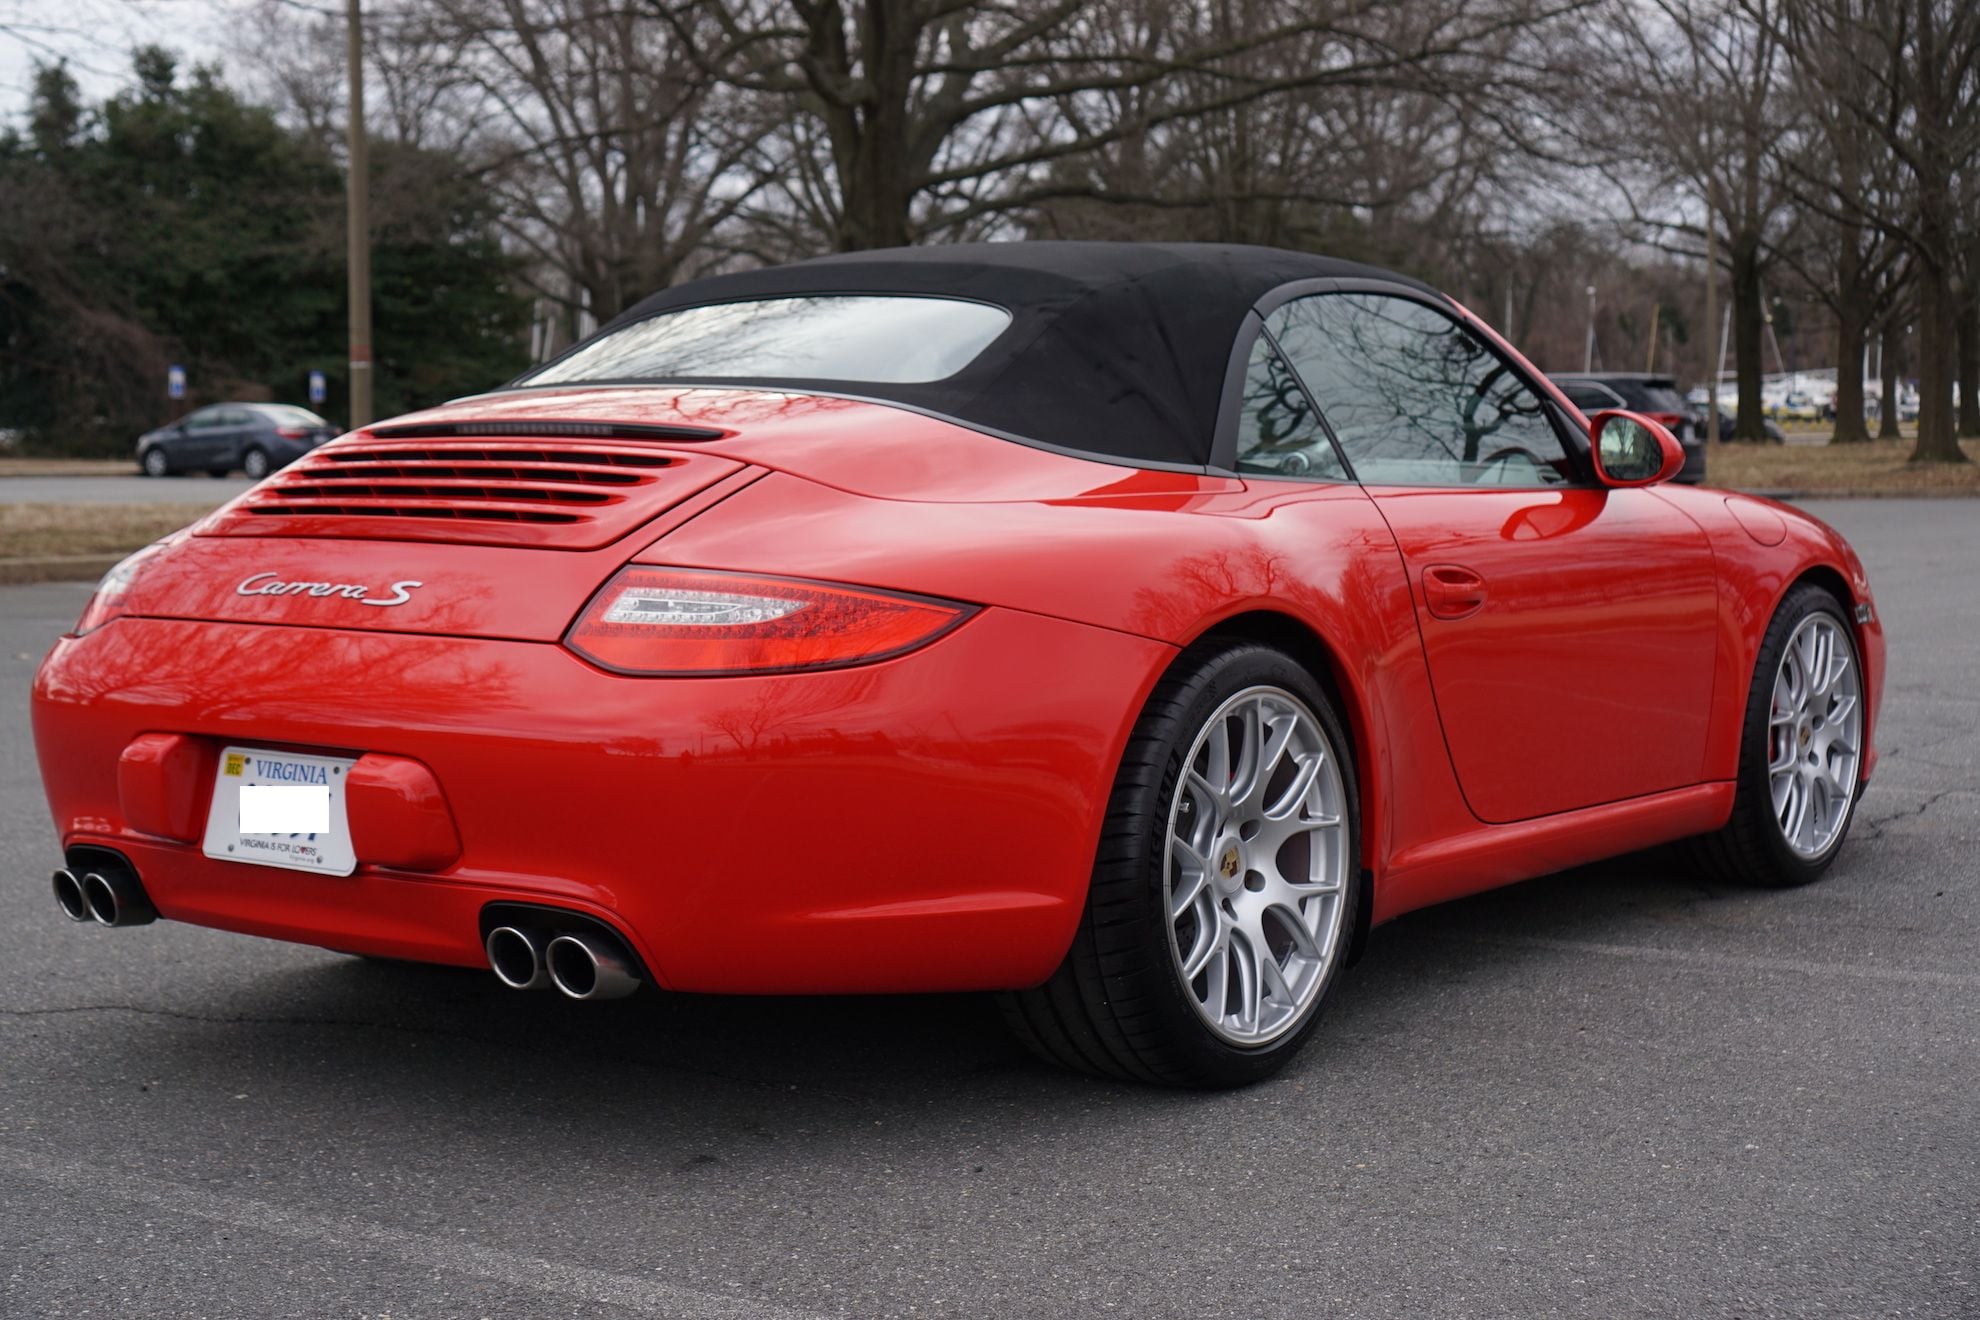 2009 Porsche 911 - 2009 911 Carrera S Cabriolet - Guards Red - Manual Transmission - Sport Chrono - Used - VIN WP0CB29949S754735 - 6 cyl - 2WD - Manual - Convertible - Red - Alexandria, VA 22314, United States